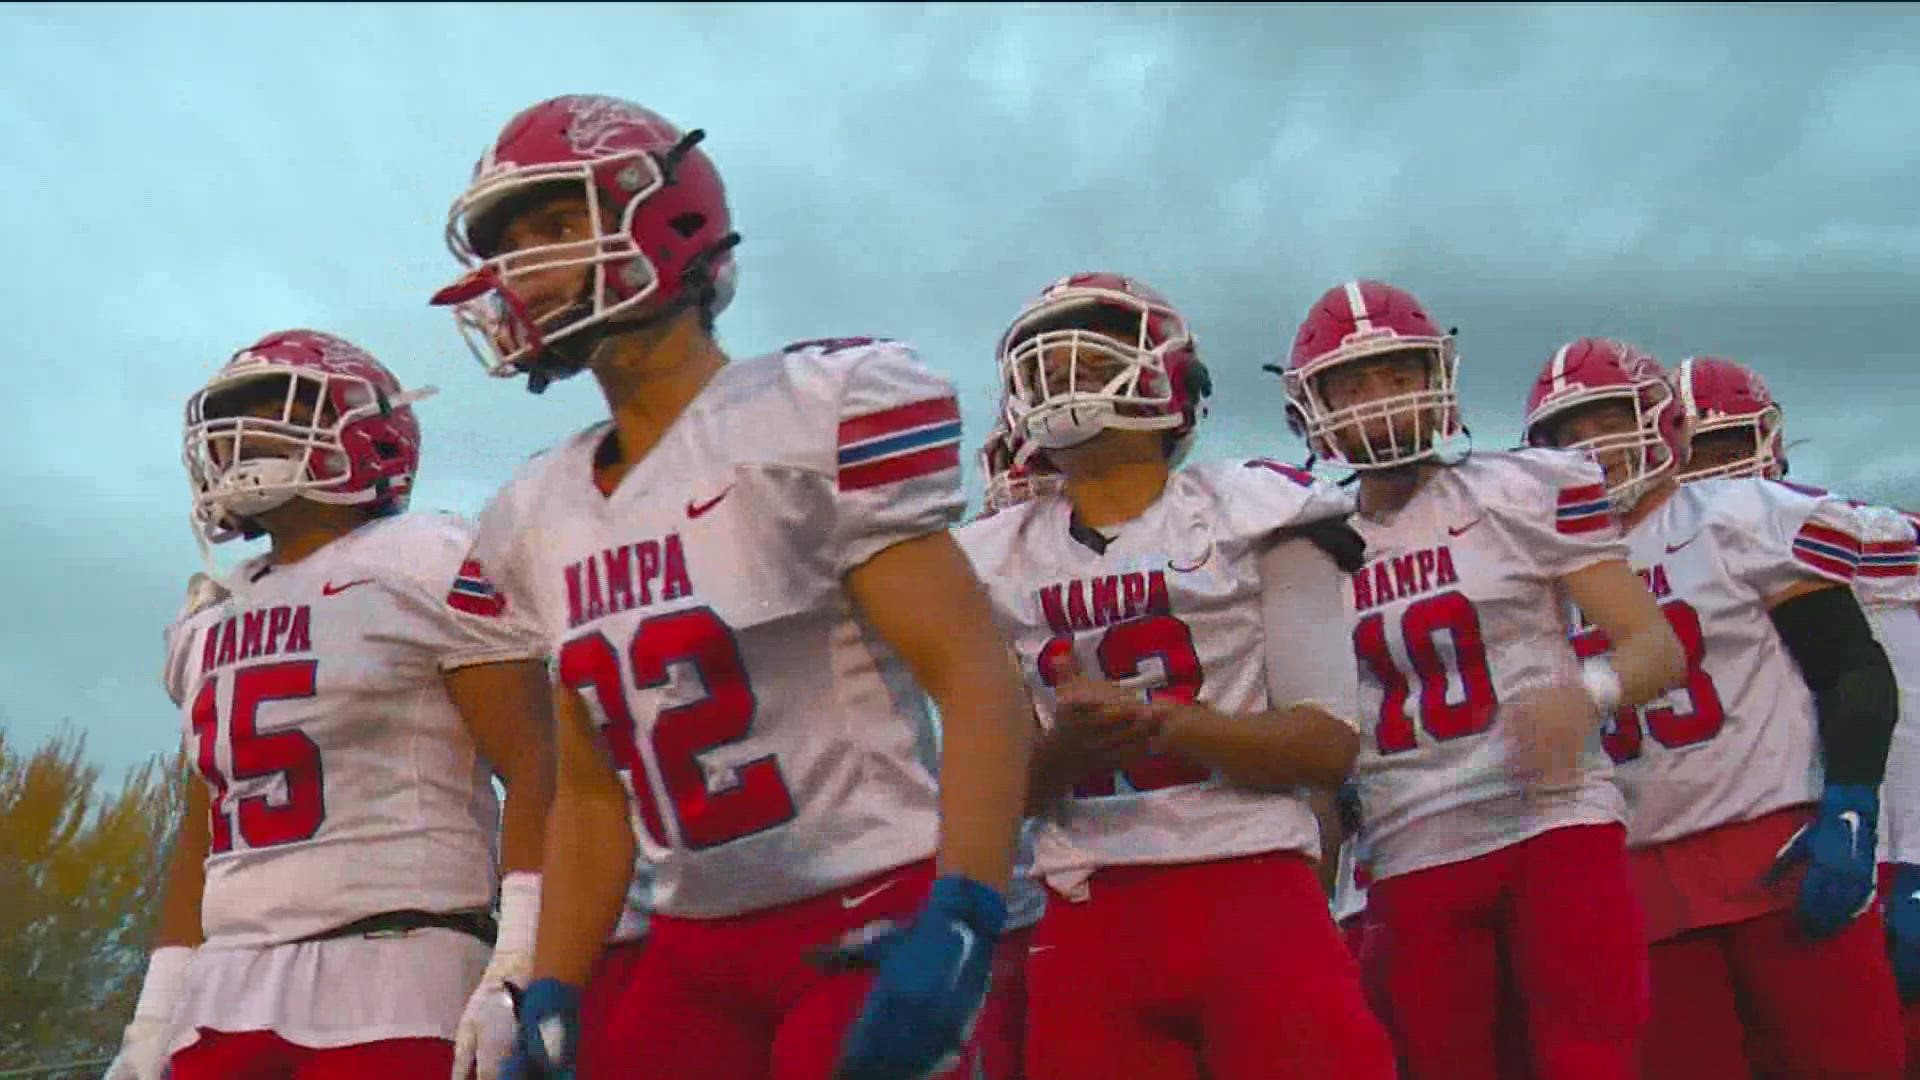 The Nampa Bulldogs have been at the 4A level for years, but now they have moved up. They are now at the highest level with a head new coach leading them.